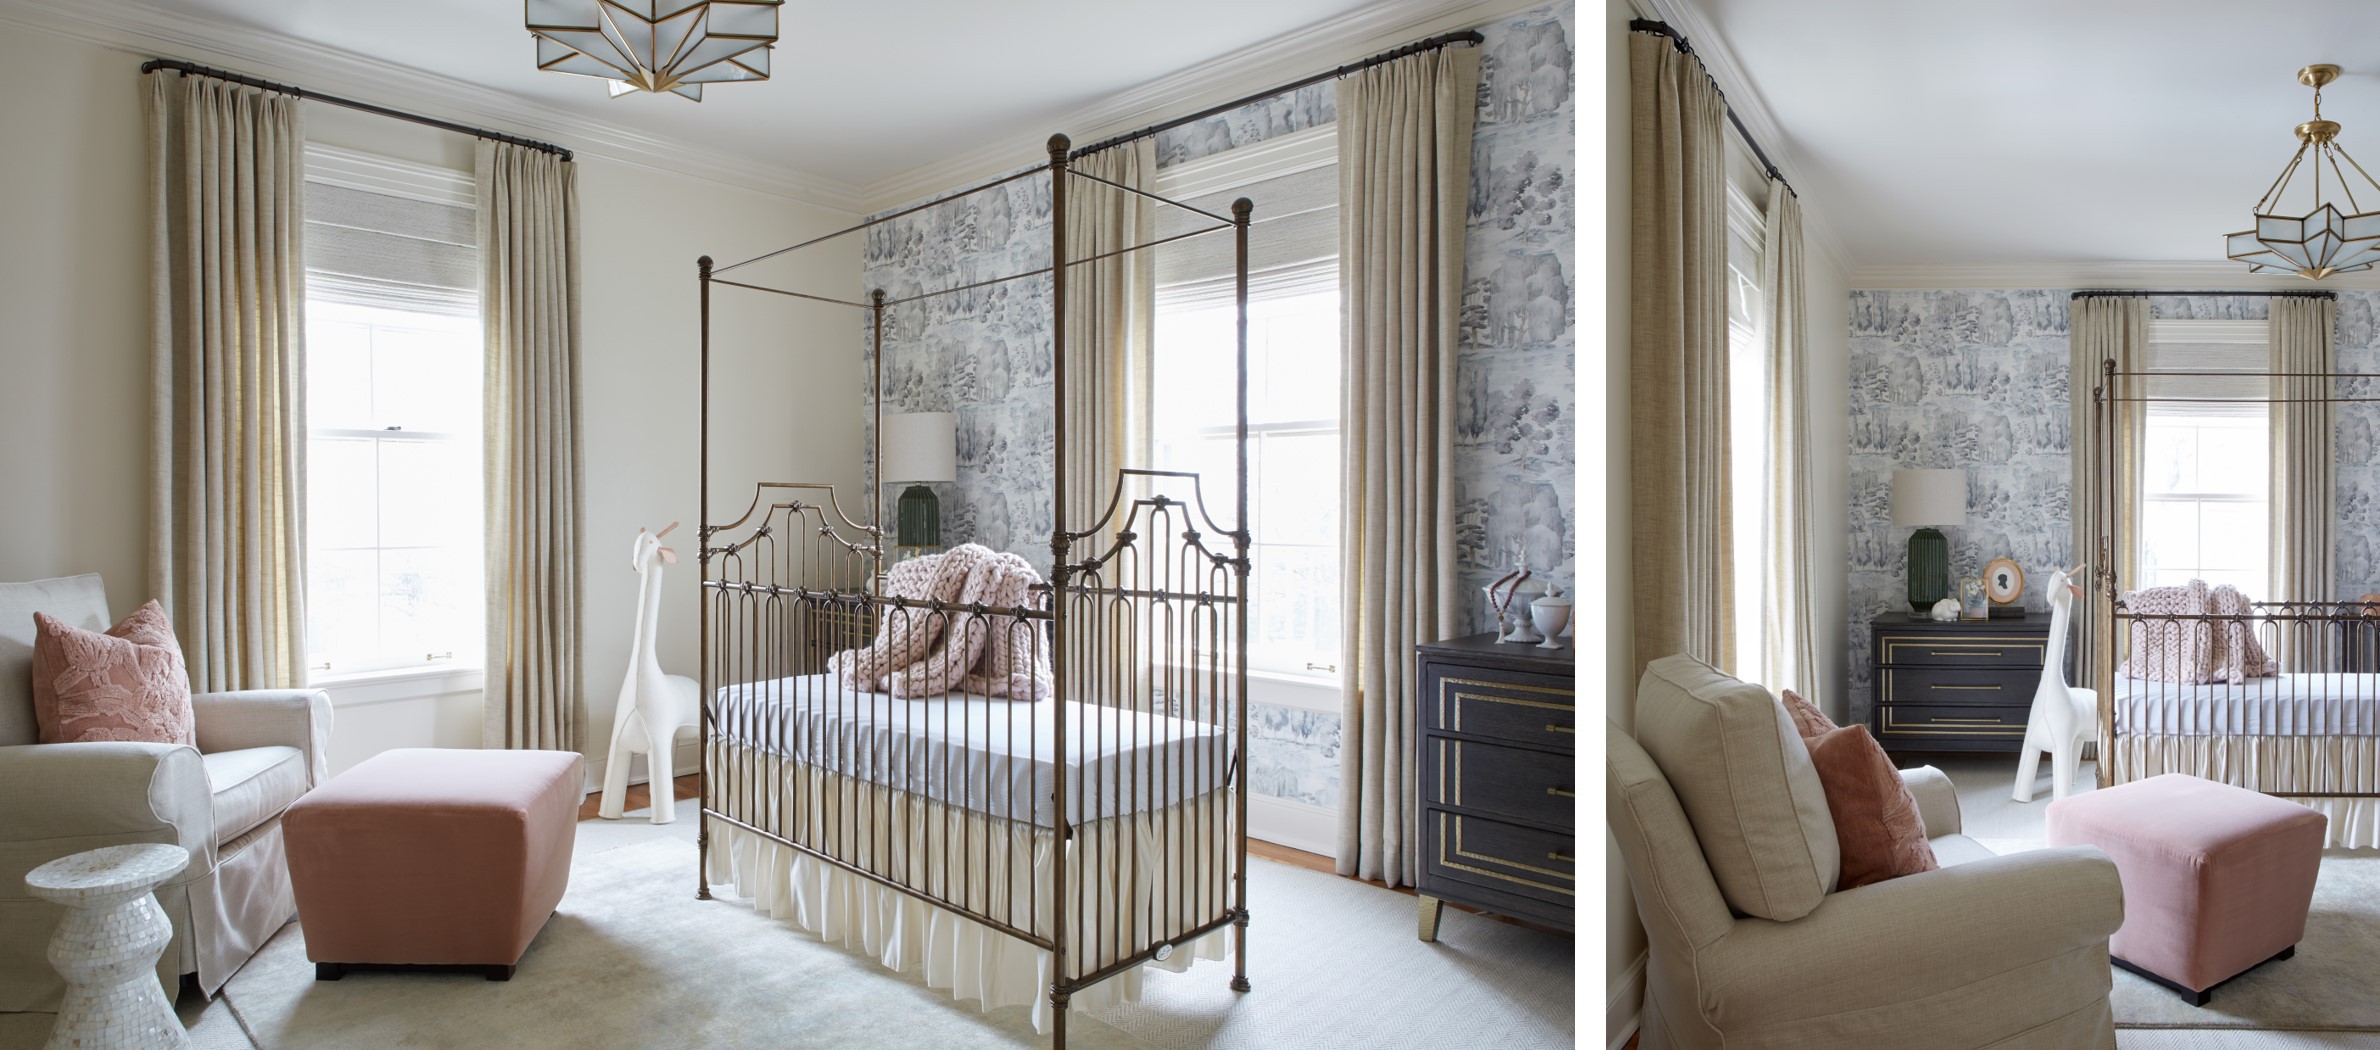 Babys room with statement wallpaper. Elegant and timeless childrens room